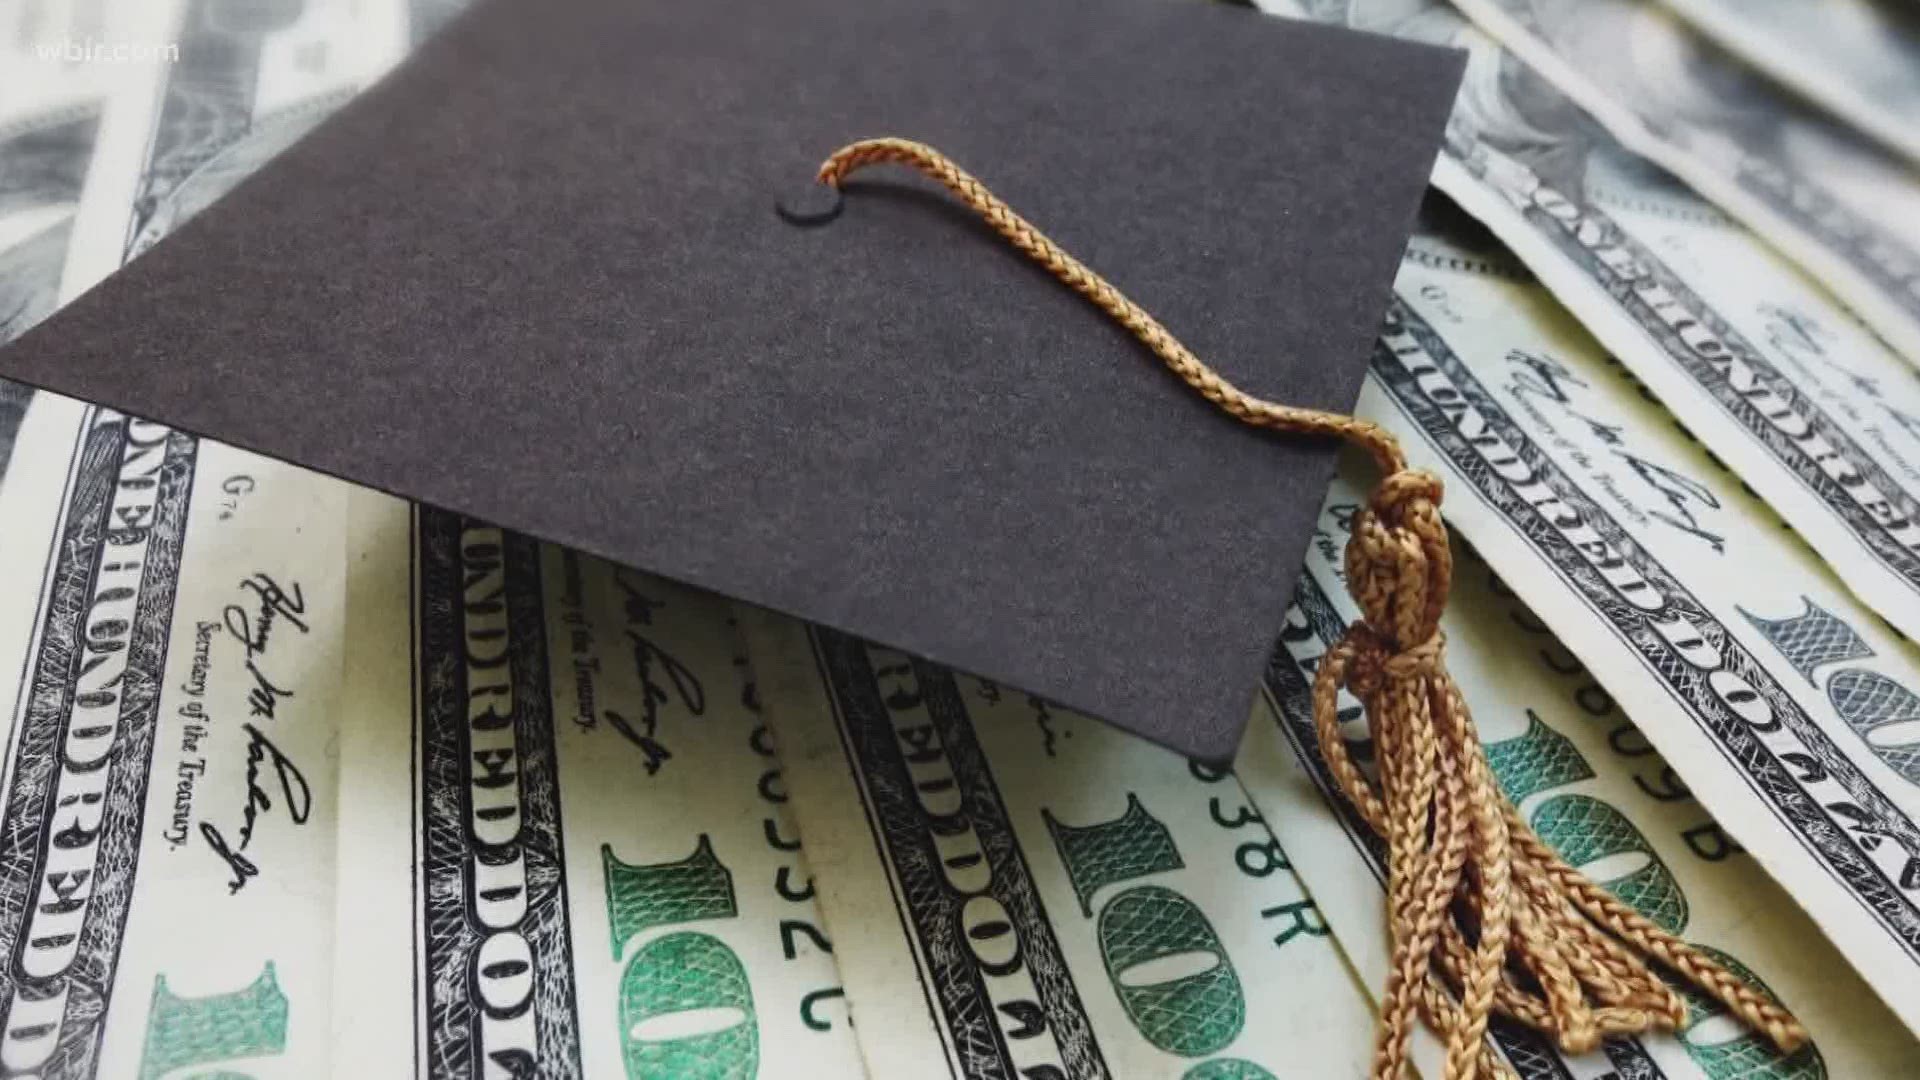 With the new year, student debt may once again come due. But there's a chance debt relief could be extended.